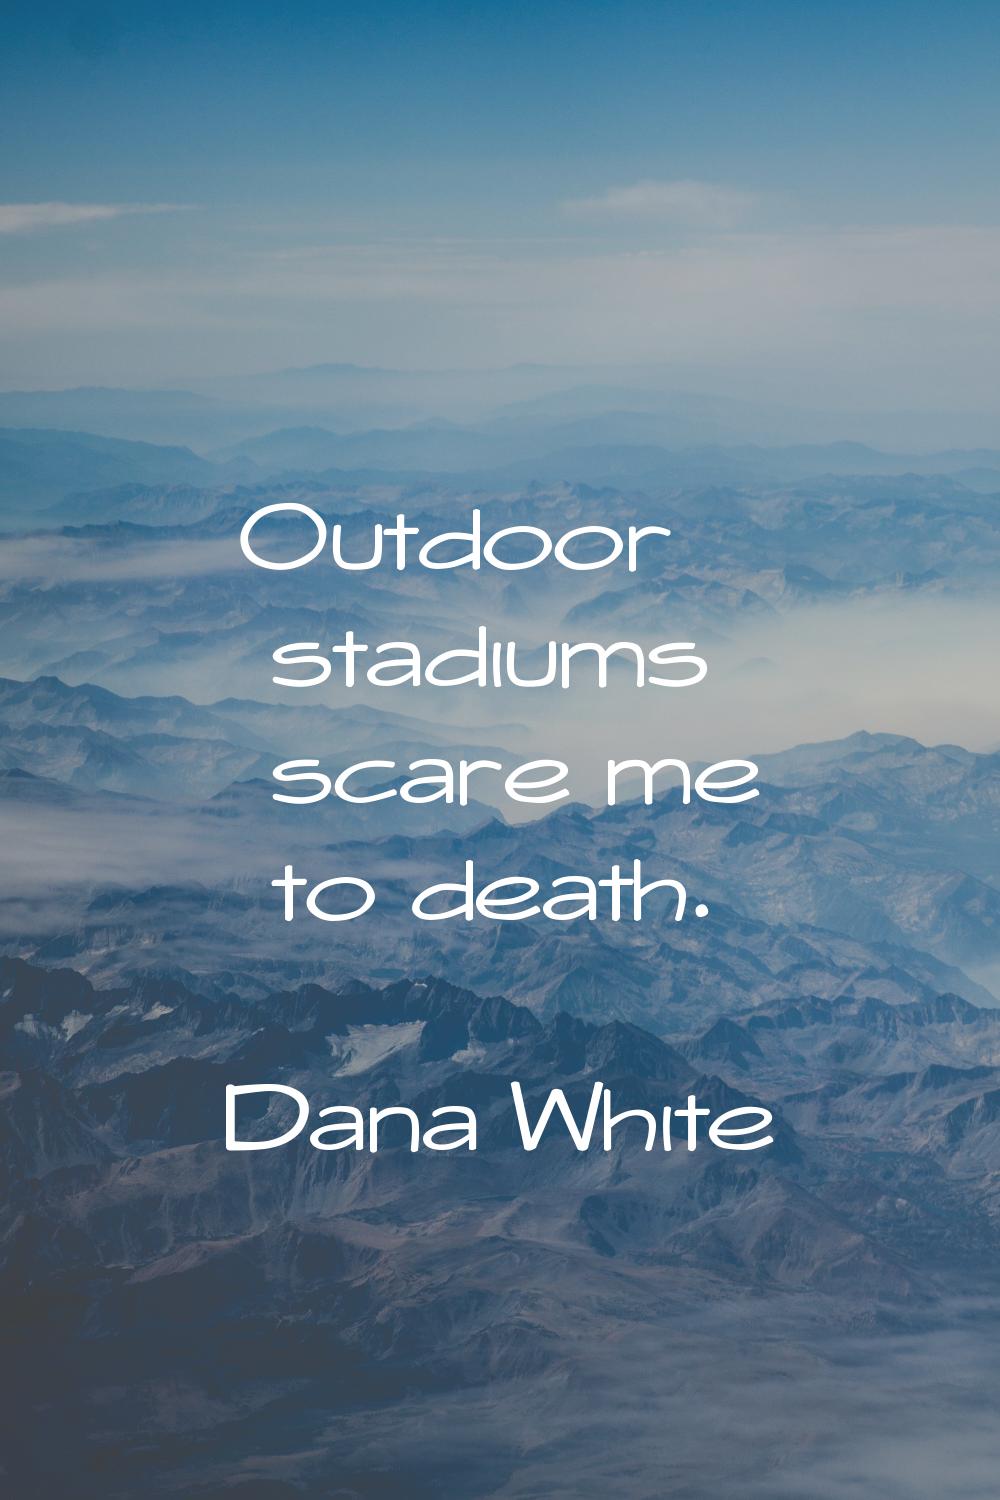 Outdoor stadiums scare me to death.